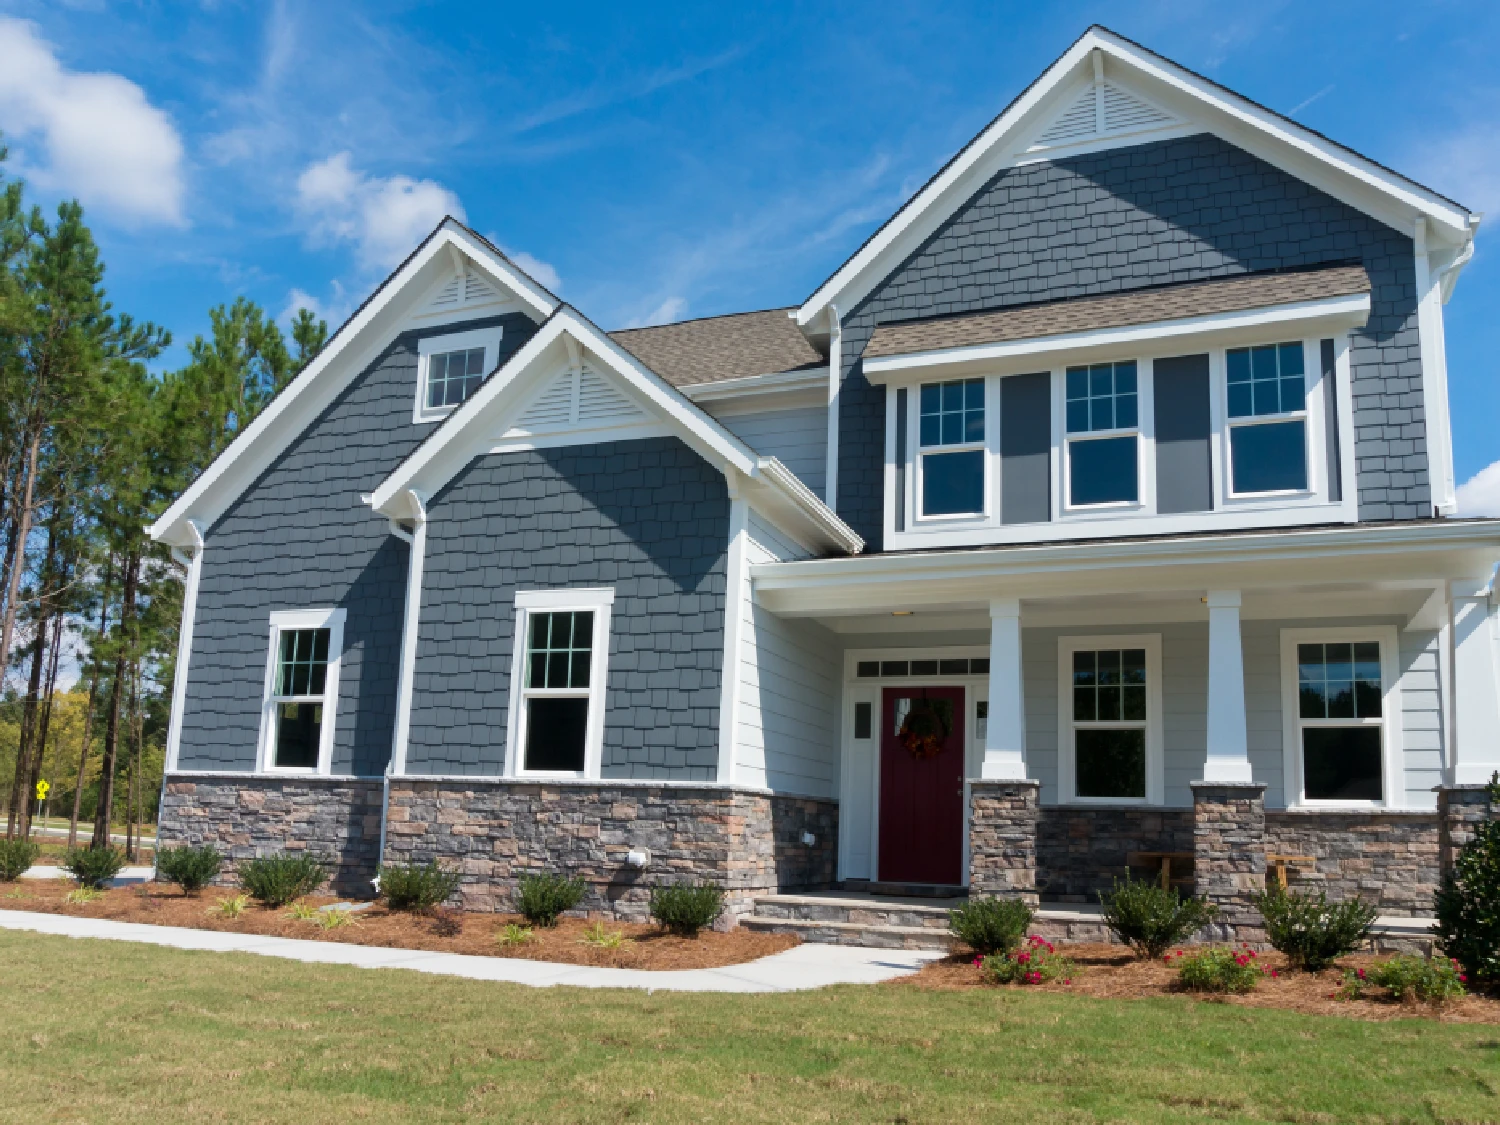 What is Fiber Cement Siding?